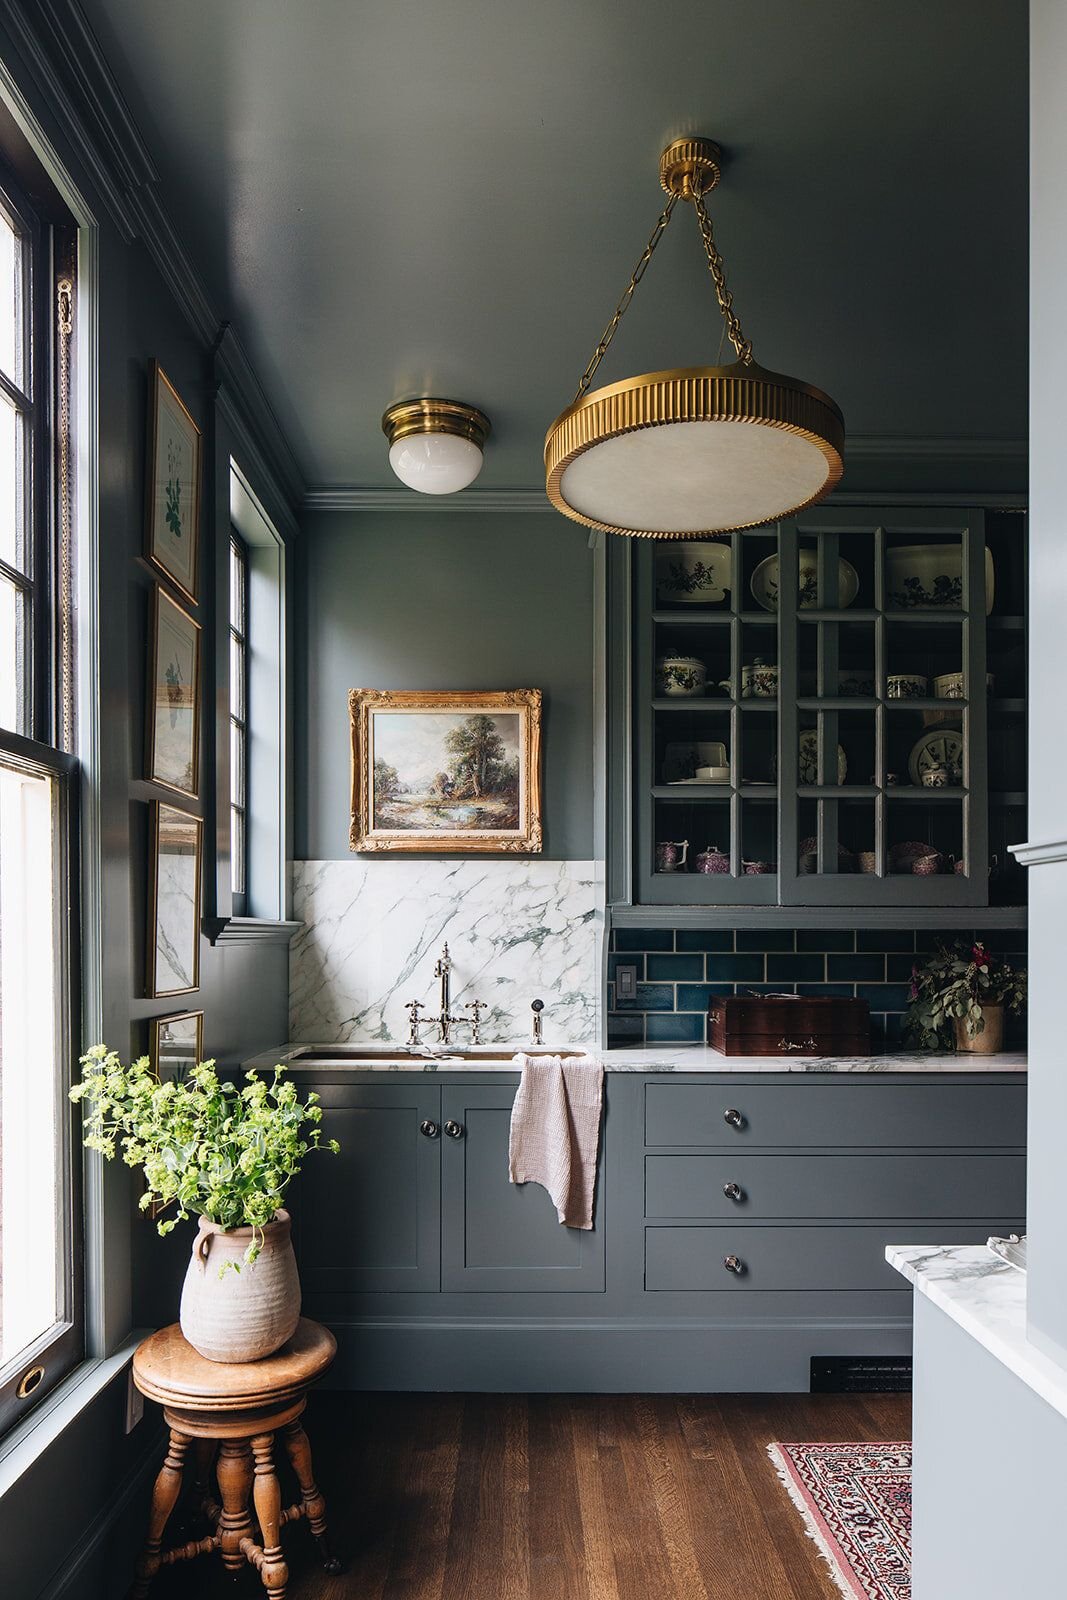 Love the sink placement and would love to do ours towards the end by the window like this!